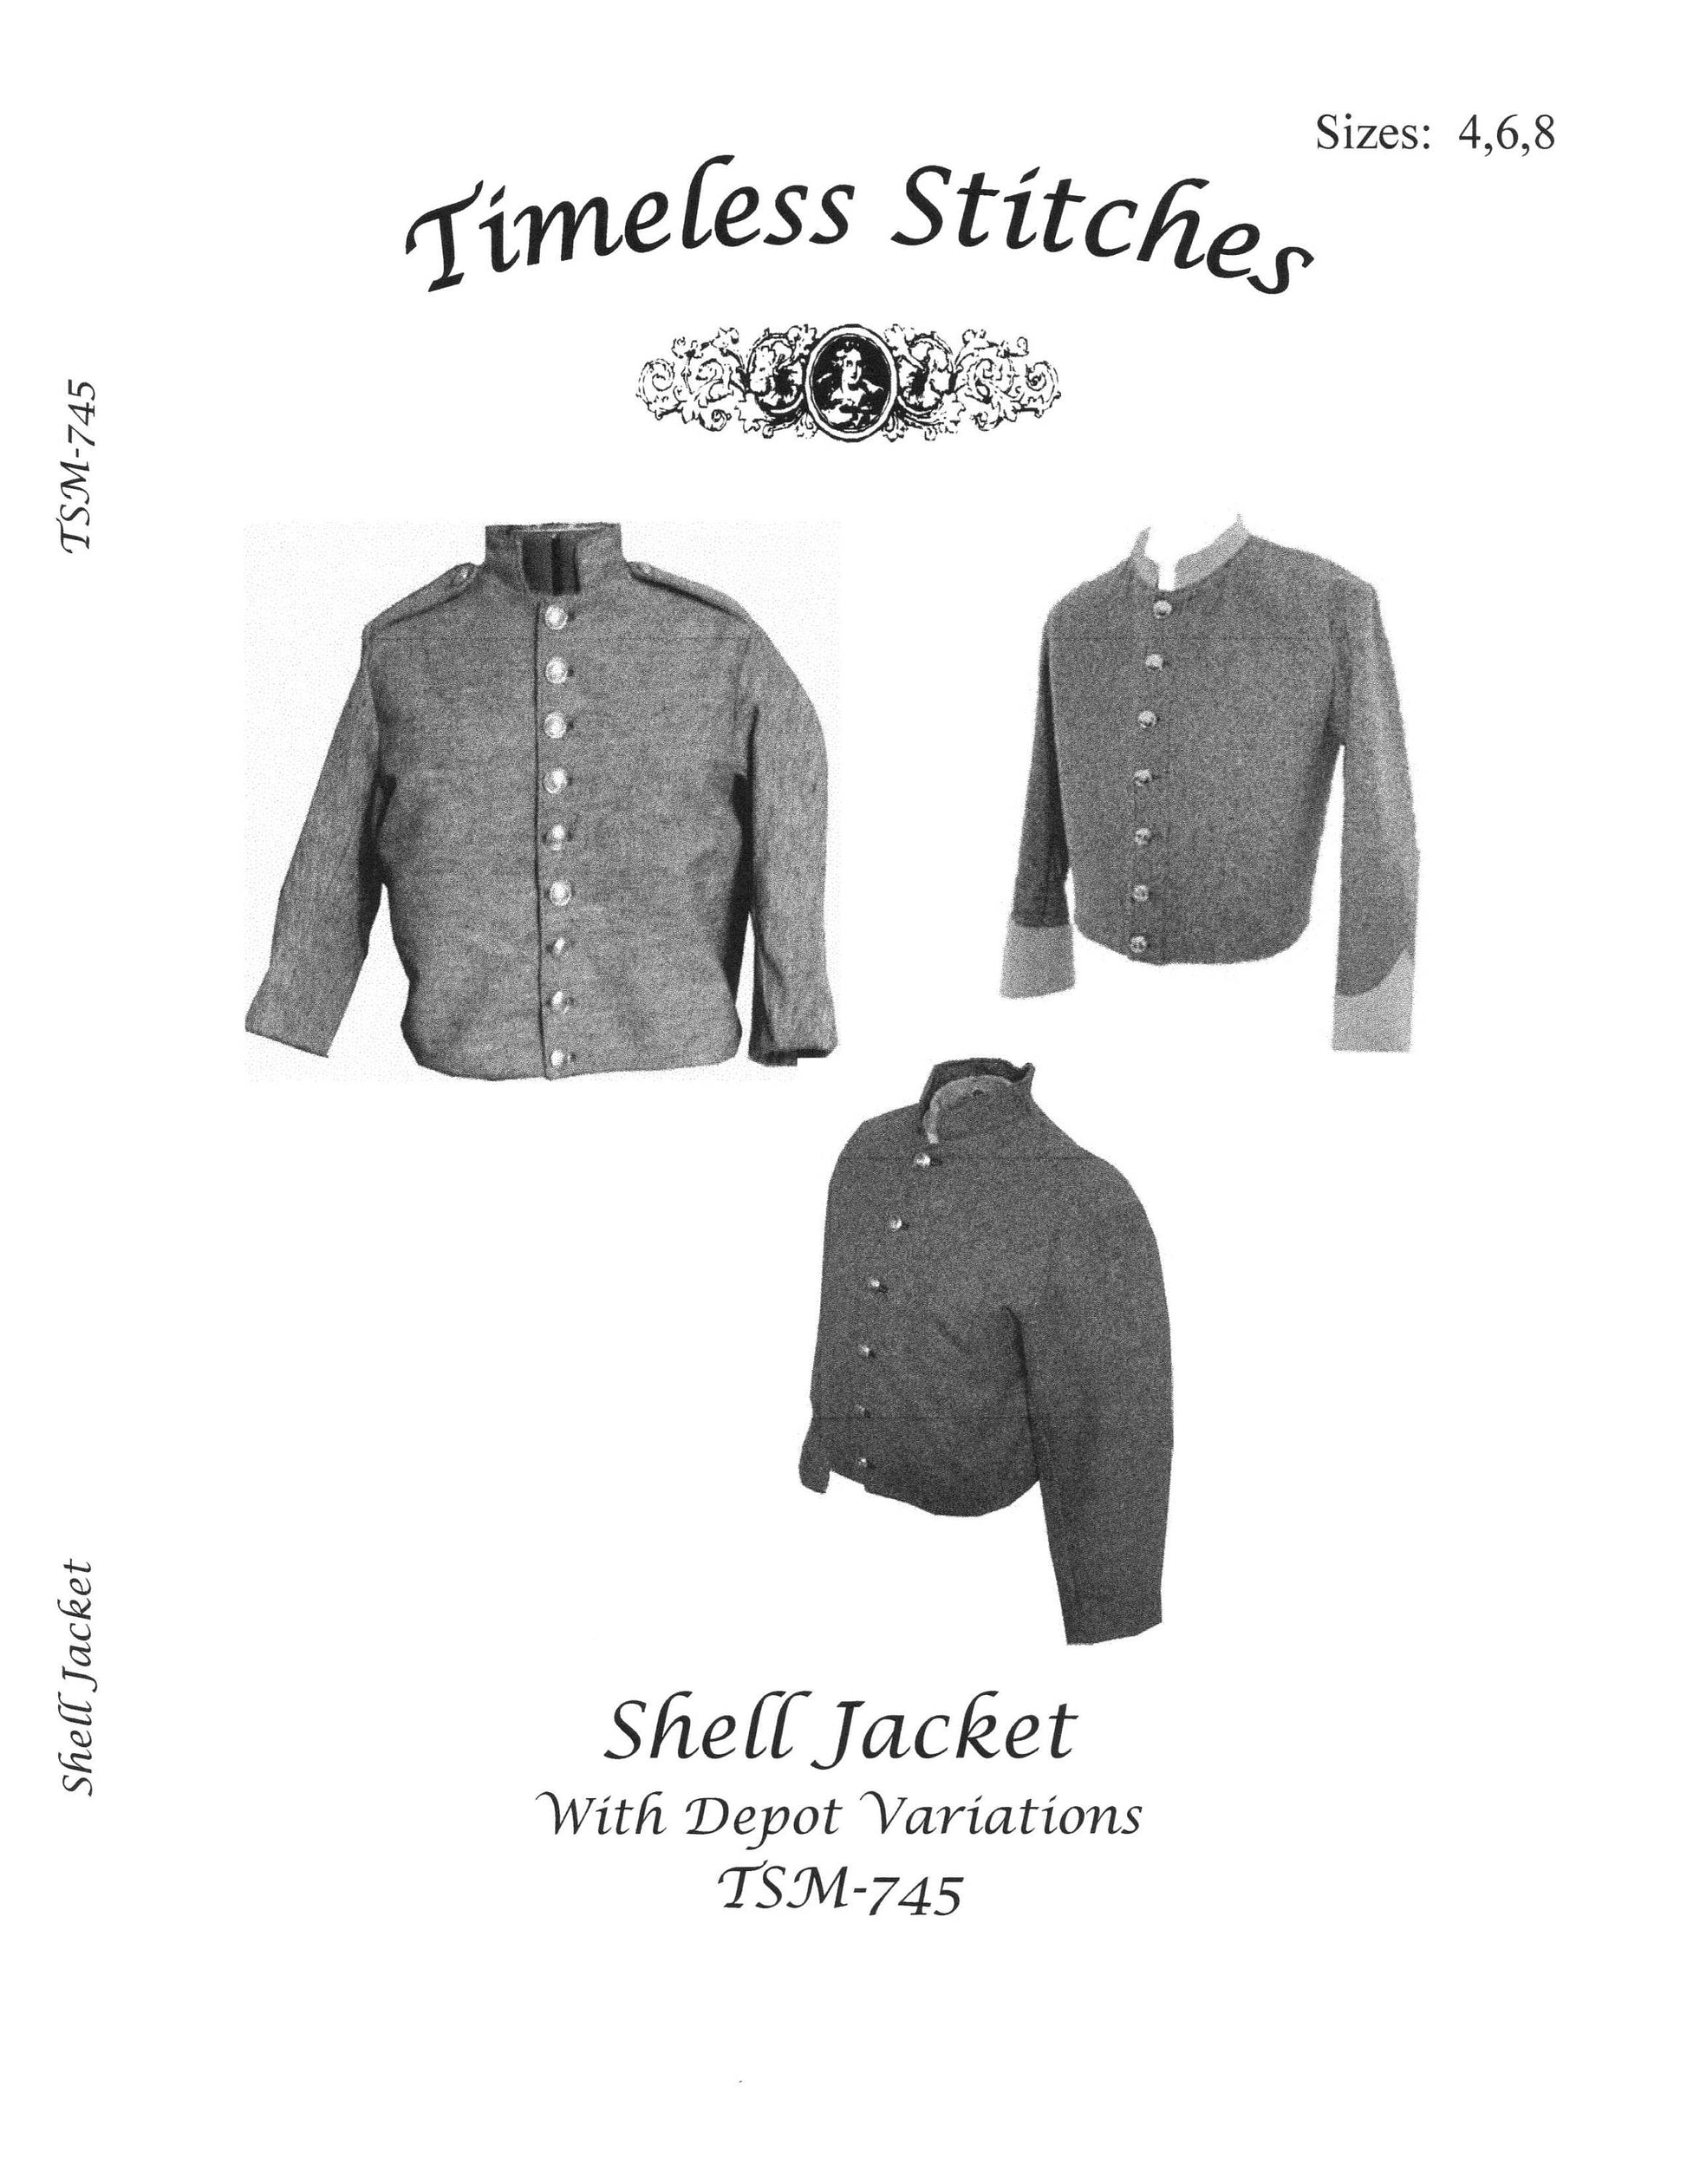 Shell Jacket with Depot Variations/ union and Confederate Shell Jacket/ Timeless Stitches TSM-745 Shell Jacket with Depot Variations